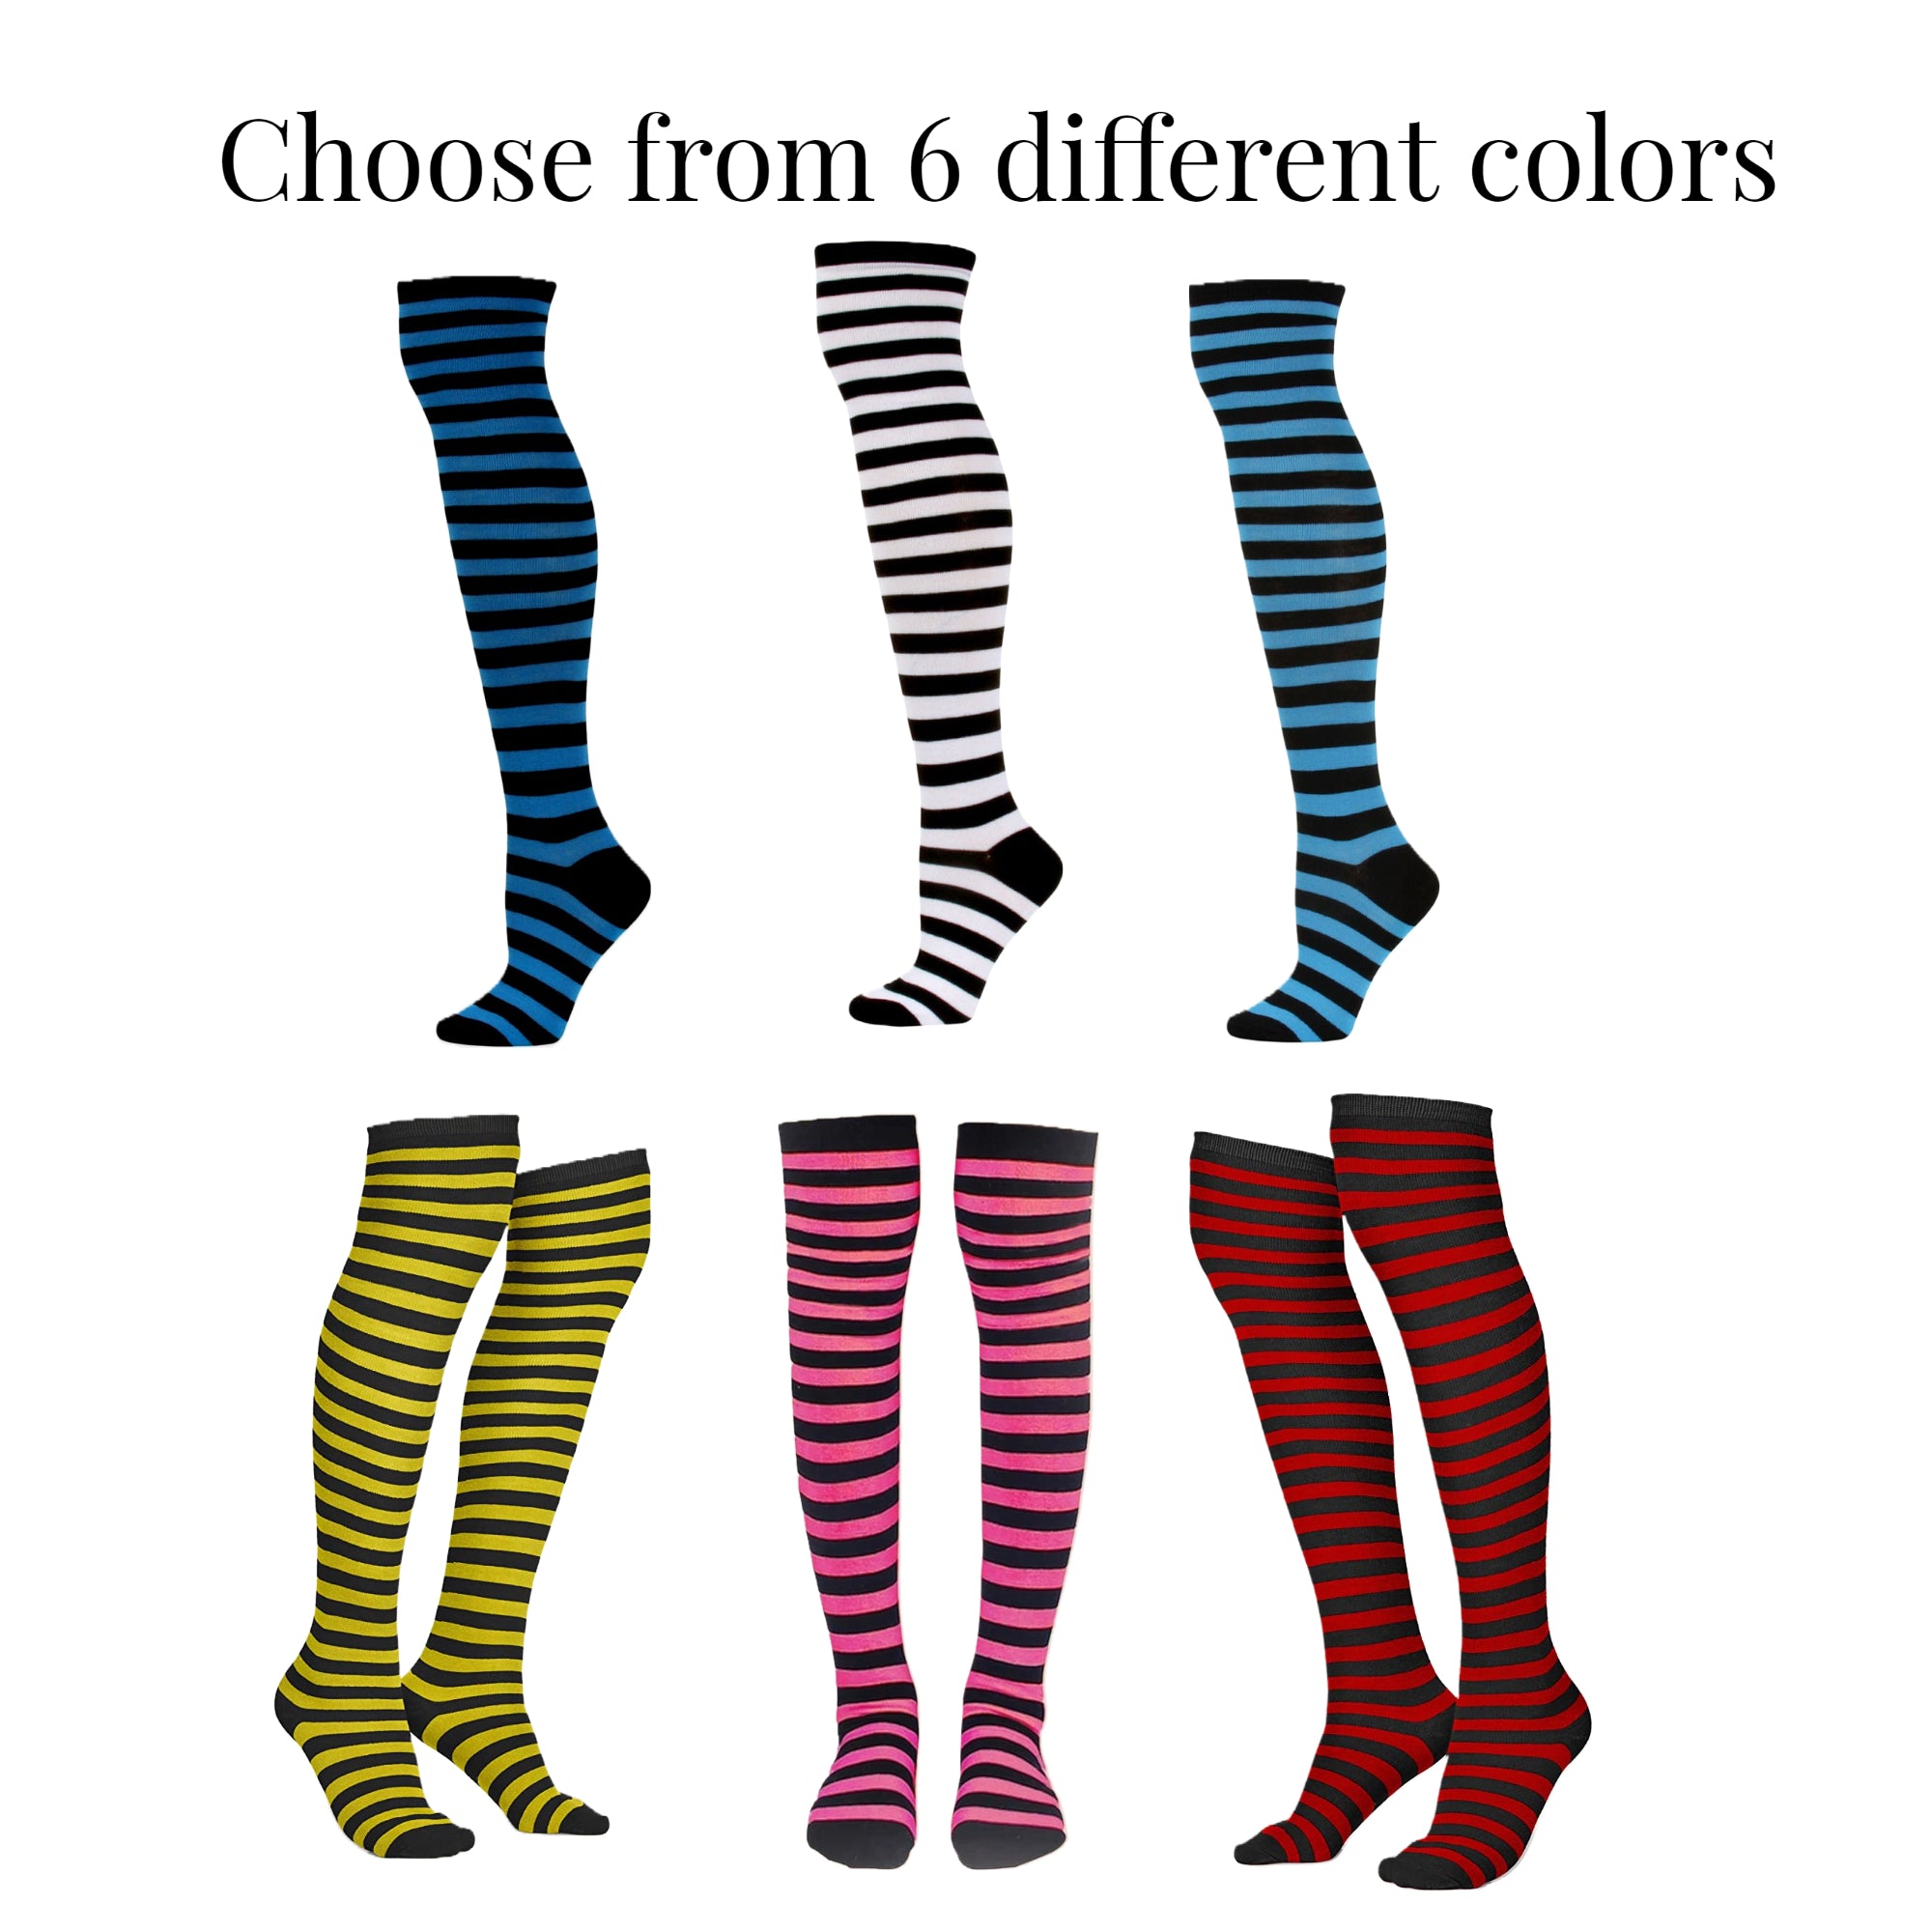 Thin Striped Patterned Socks (Thigh High) from the Sock Panda